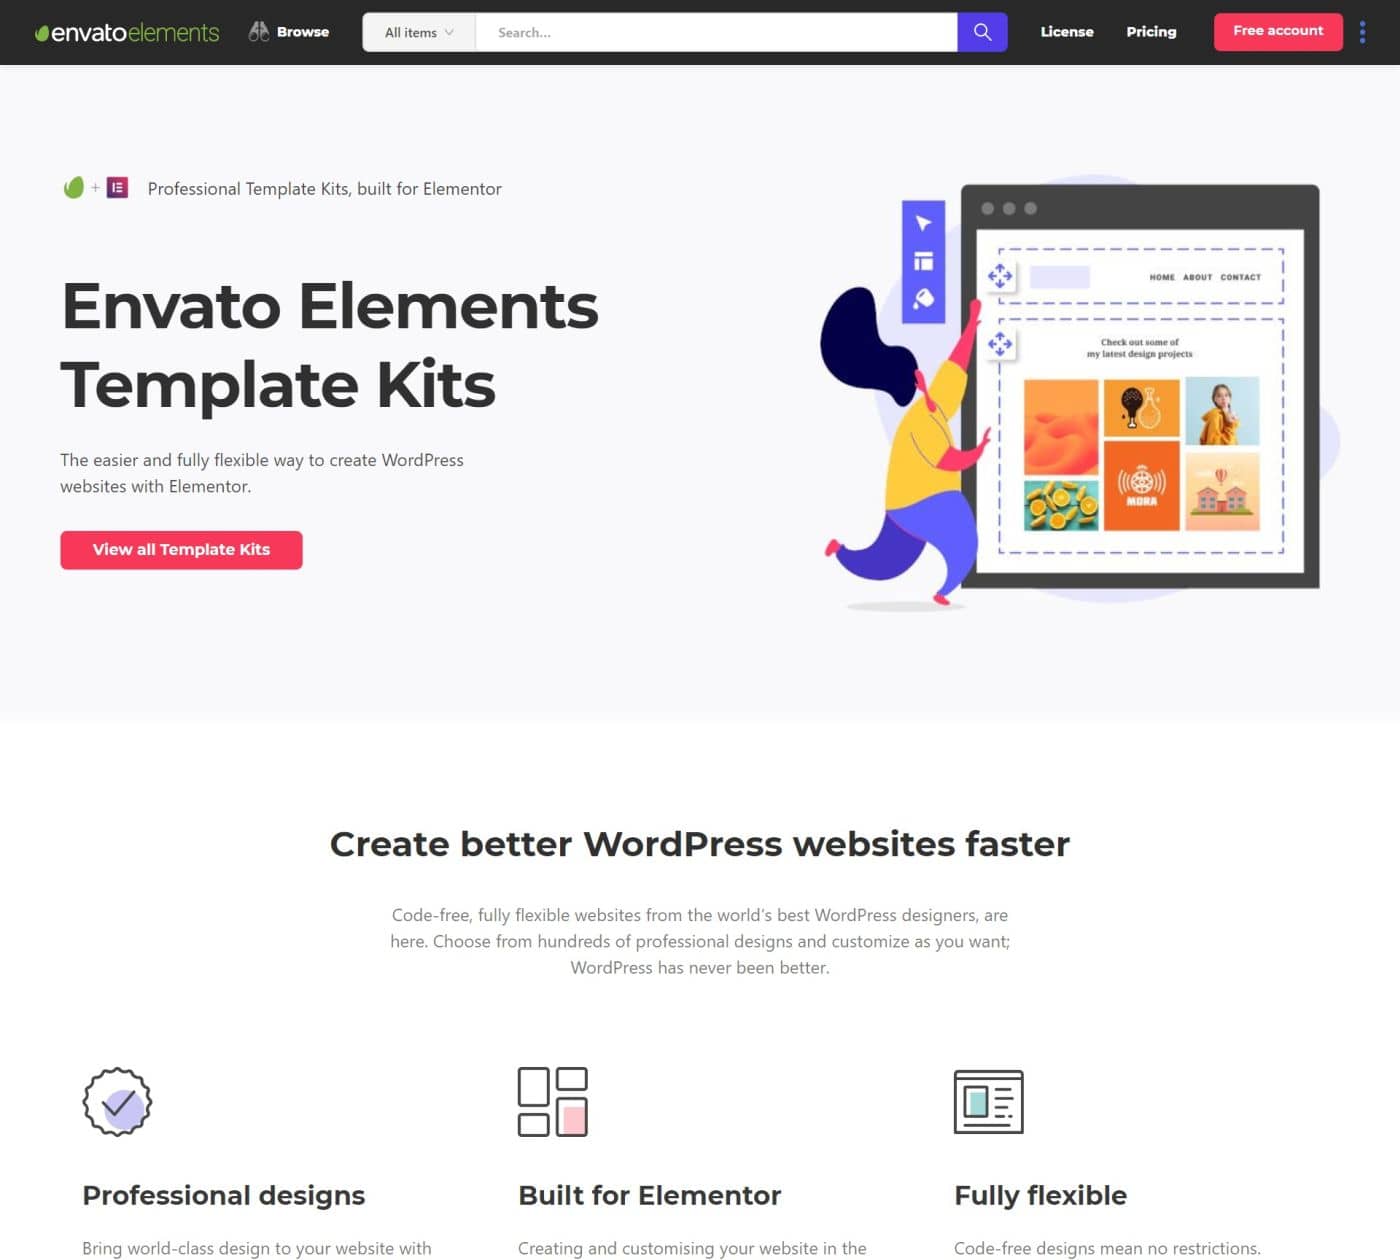 Template Kits by Envato Elements offers some of the best Elementor templates on the market